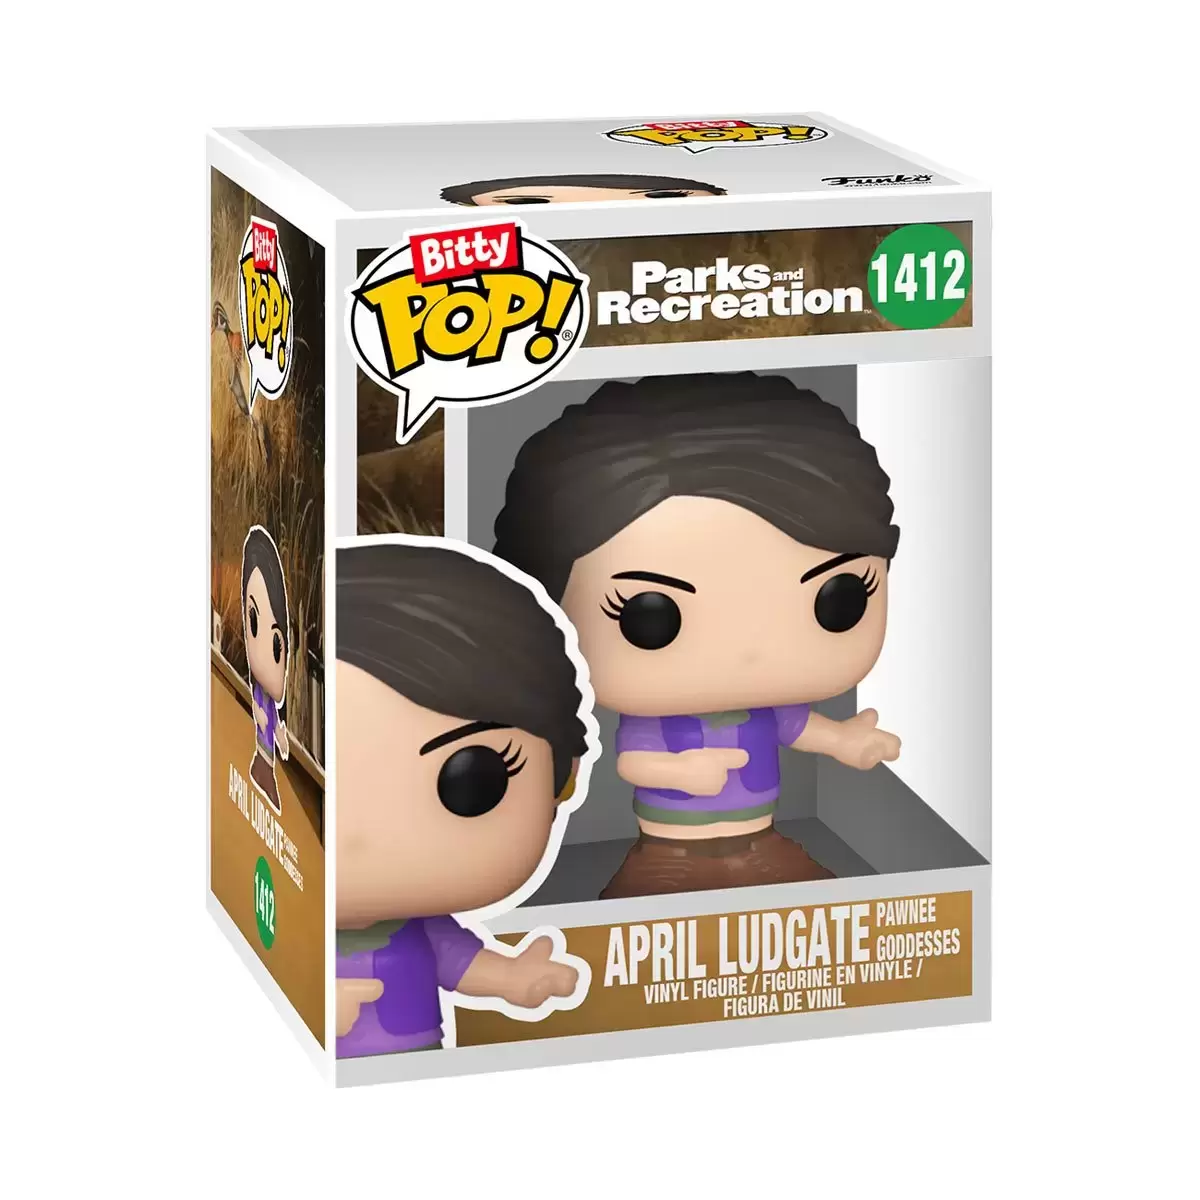 Bitty POP! - Parks And Recreation -  April Ludgate